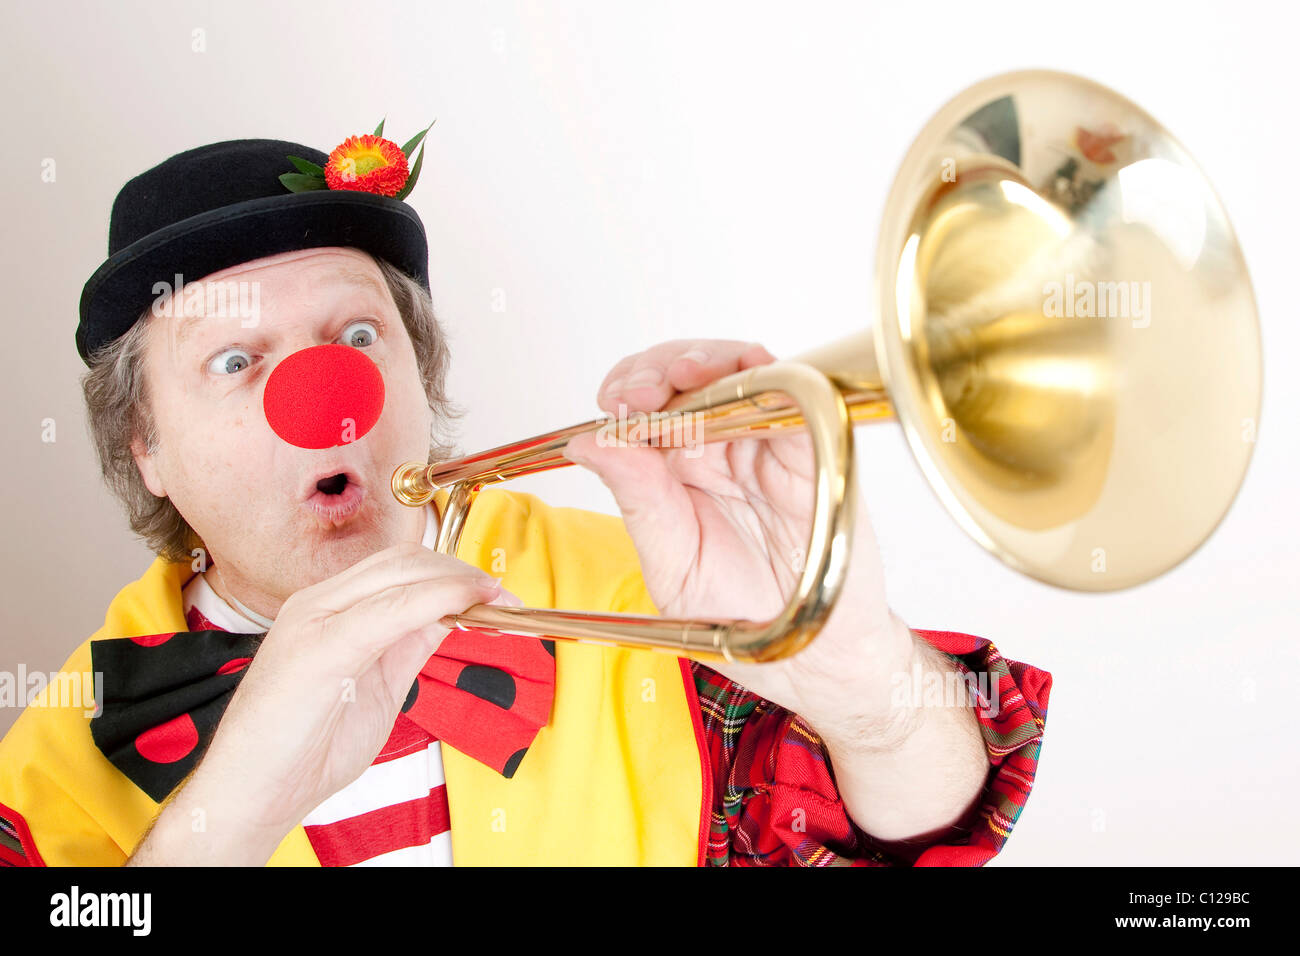 Clown with a fanfare horn, natural trumpet or clarion Stock Photo